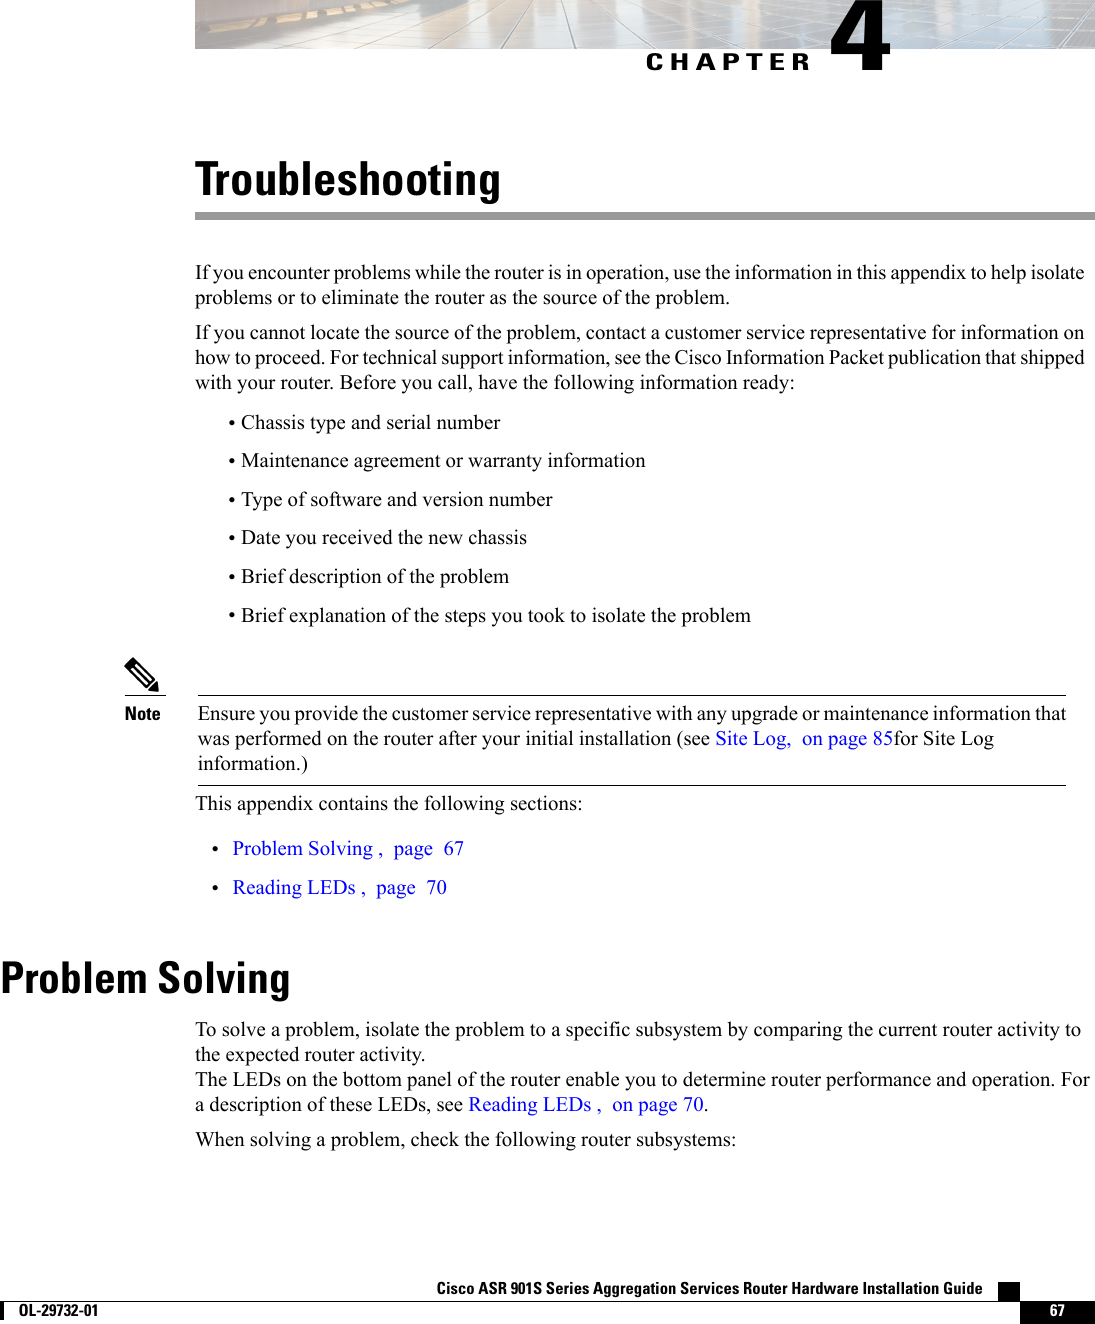 CHAPTER 4TroubleshootingIf you encounter problems while the router is in operation, use the information in this appendix to help isolateproblems or to eliminate the router as the source of the problem.If you cannot locate the source of the problem, contact a customer service representative for information onhow to proceed. For technical support information, see the Cisco Information Packet publication that shippedwith your router. Before you call, have the following information ready:•Chassis type and serial number•Maintenance agreement or warranty information•Type of software and version number•Date you received the new chassis•Brief description of the problem•Brief explanation of the steps you took to isolate the problemEnsure you provide the customer service representative with any upgrade or maintenance information thatwas performed on the router after your initial installation (see Site Log, on page 85for Site Loginformation.)NoteThis appendix contains the following sections:•Problem Solving , page 67•Reading LEDs , page 70Problem SolvingTo solve a problem, isolate the problem to a specific subsystem by comparing the current router activity tothe expected router activity.The LEDs on the bottom panel of the router enable you to determine router performance and operation. Fora description of these LEDs, see Reading LEDs , on page 70.When solving a problem, check the following router subsystems:Cisco ASR 901S Series Aggregation Services Router Hardware Installation Guide        OL-29732-01 67